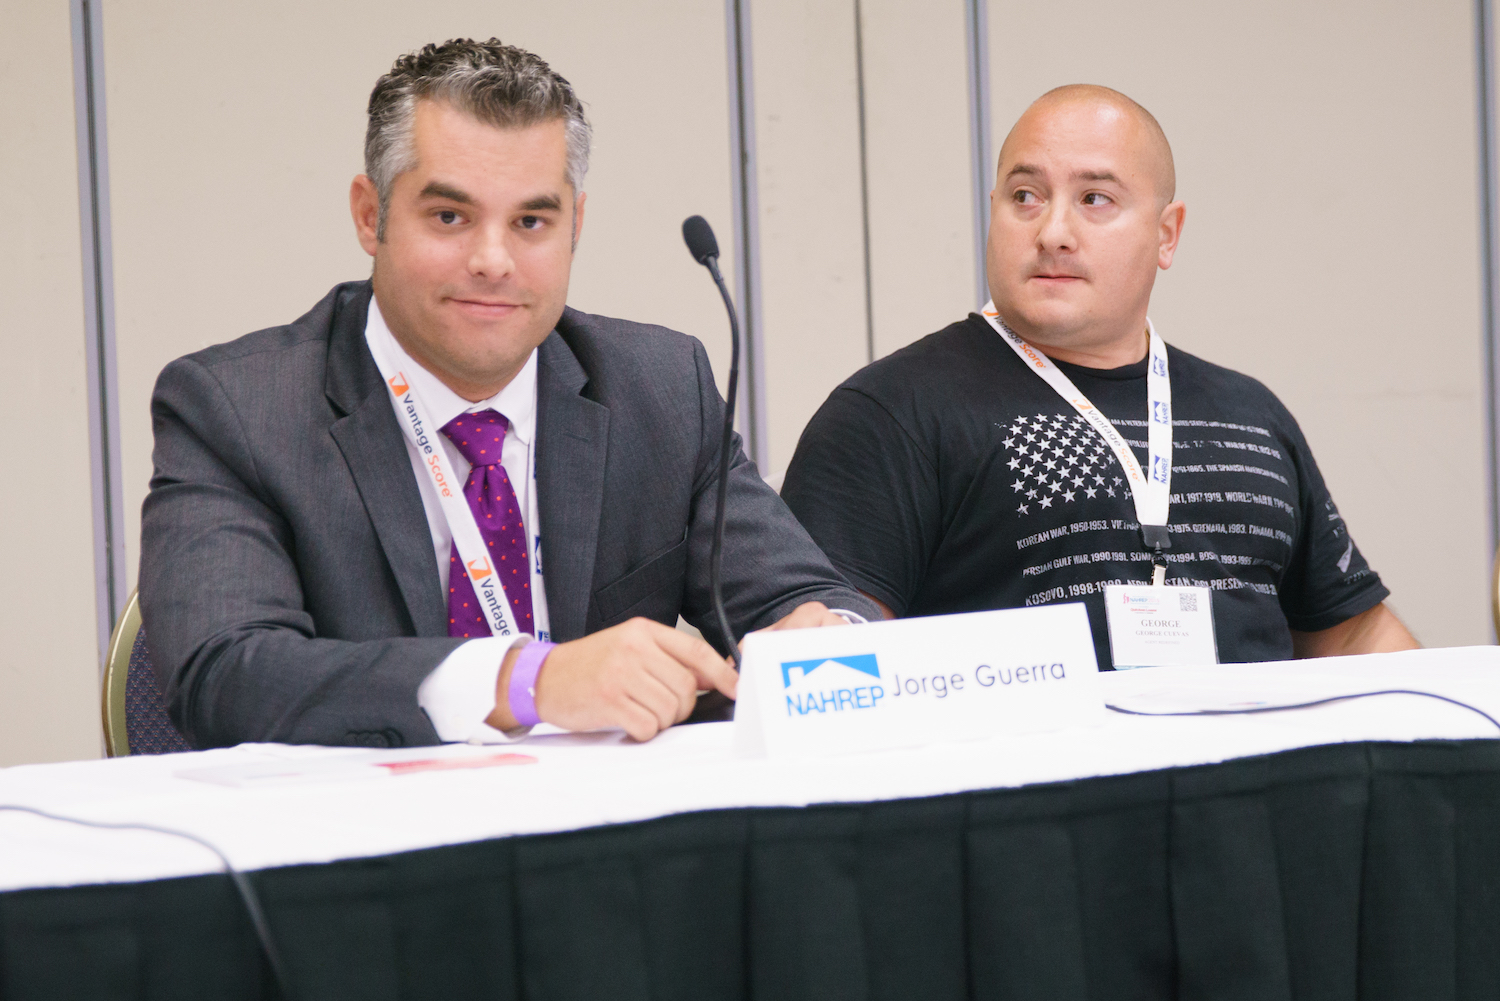 NAHREP 2015 Convention in Chicago with panelist Jorge Guerra Jr.